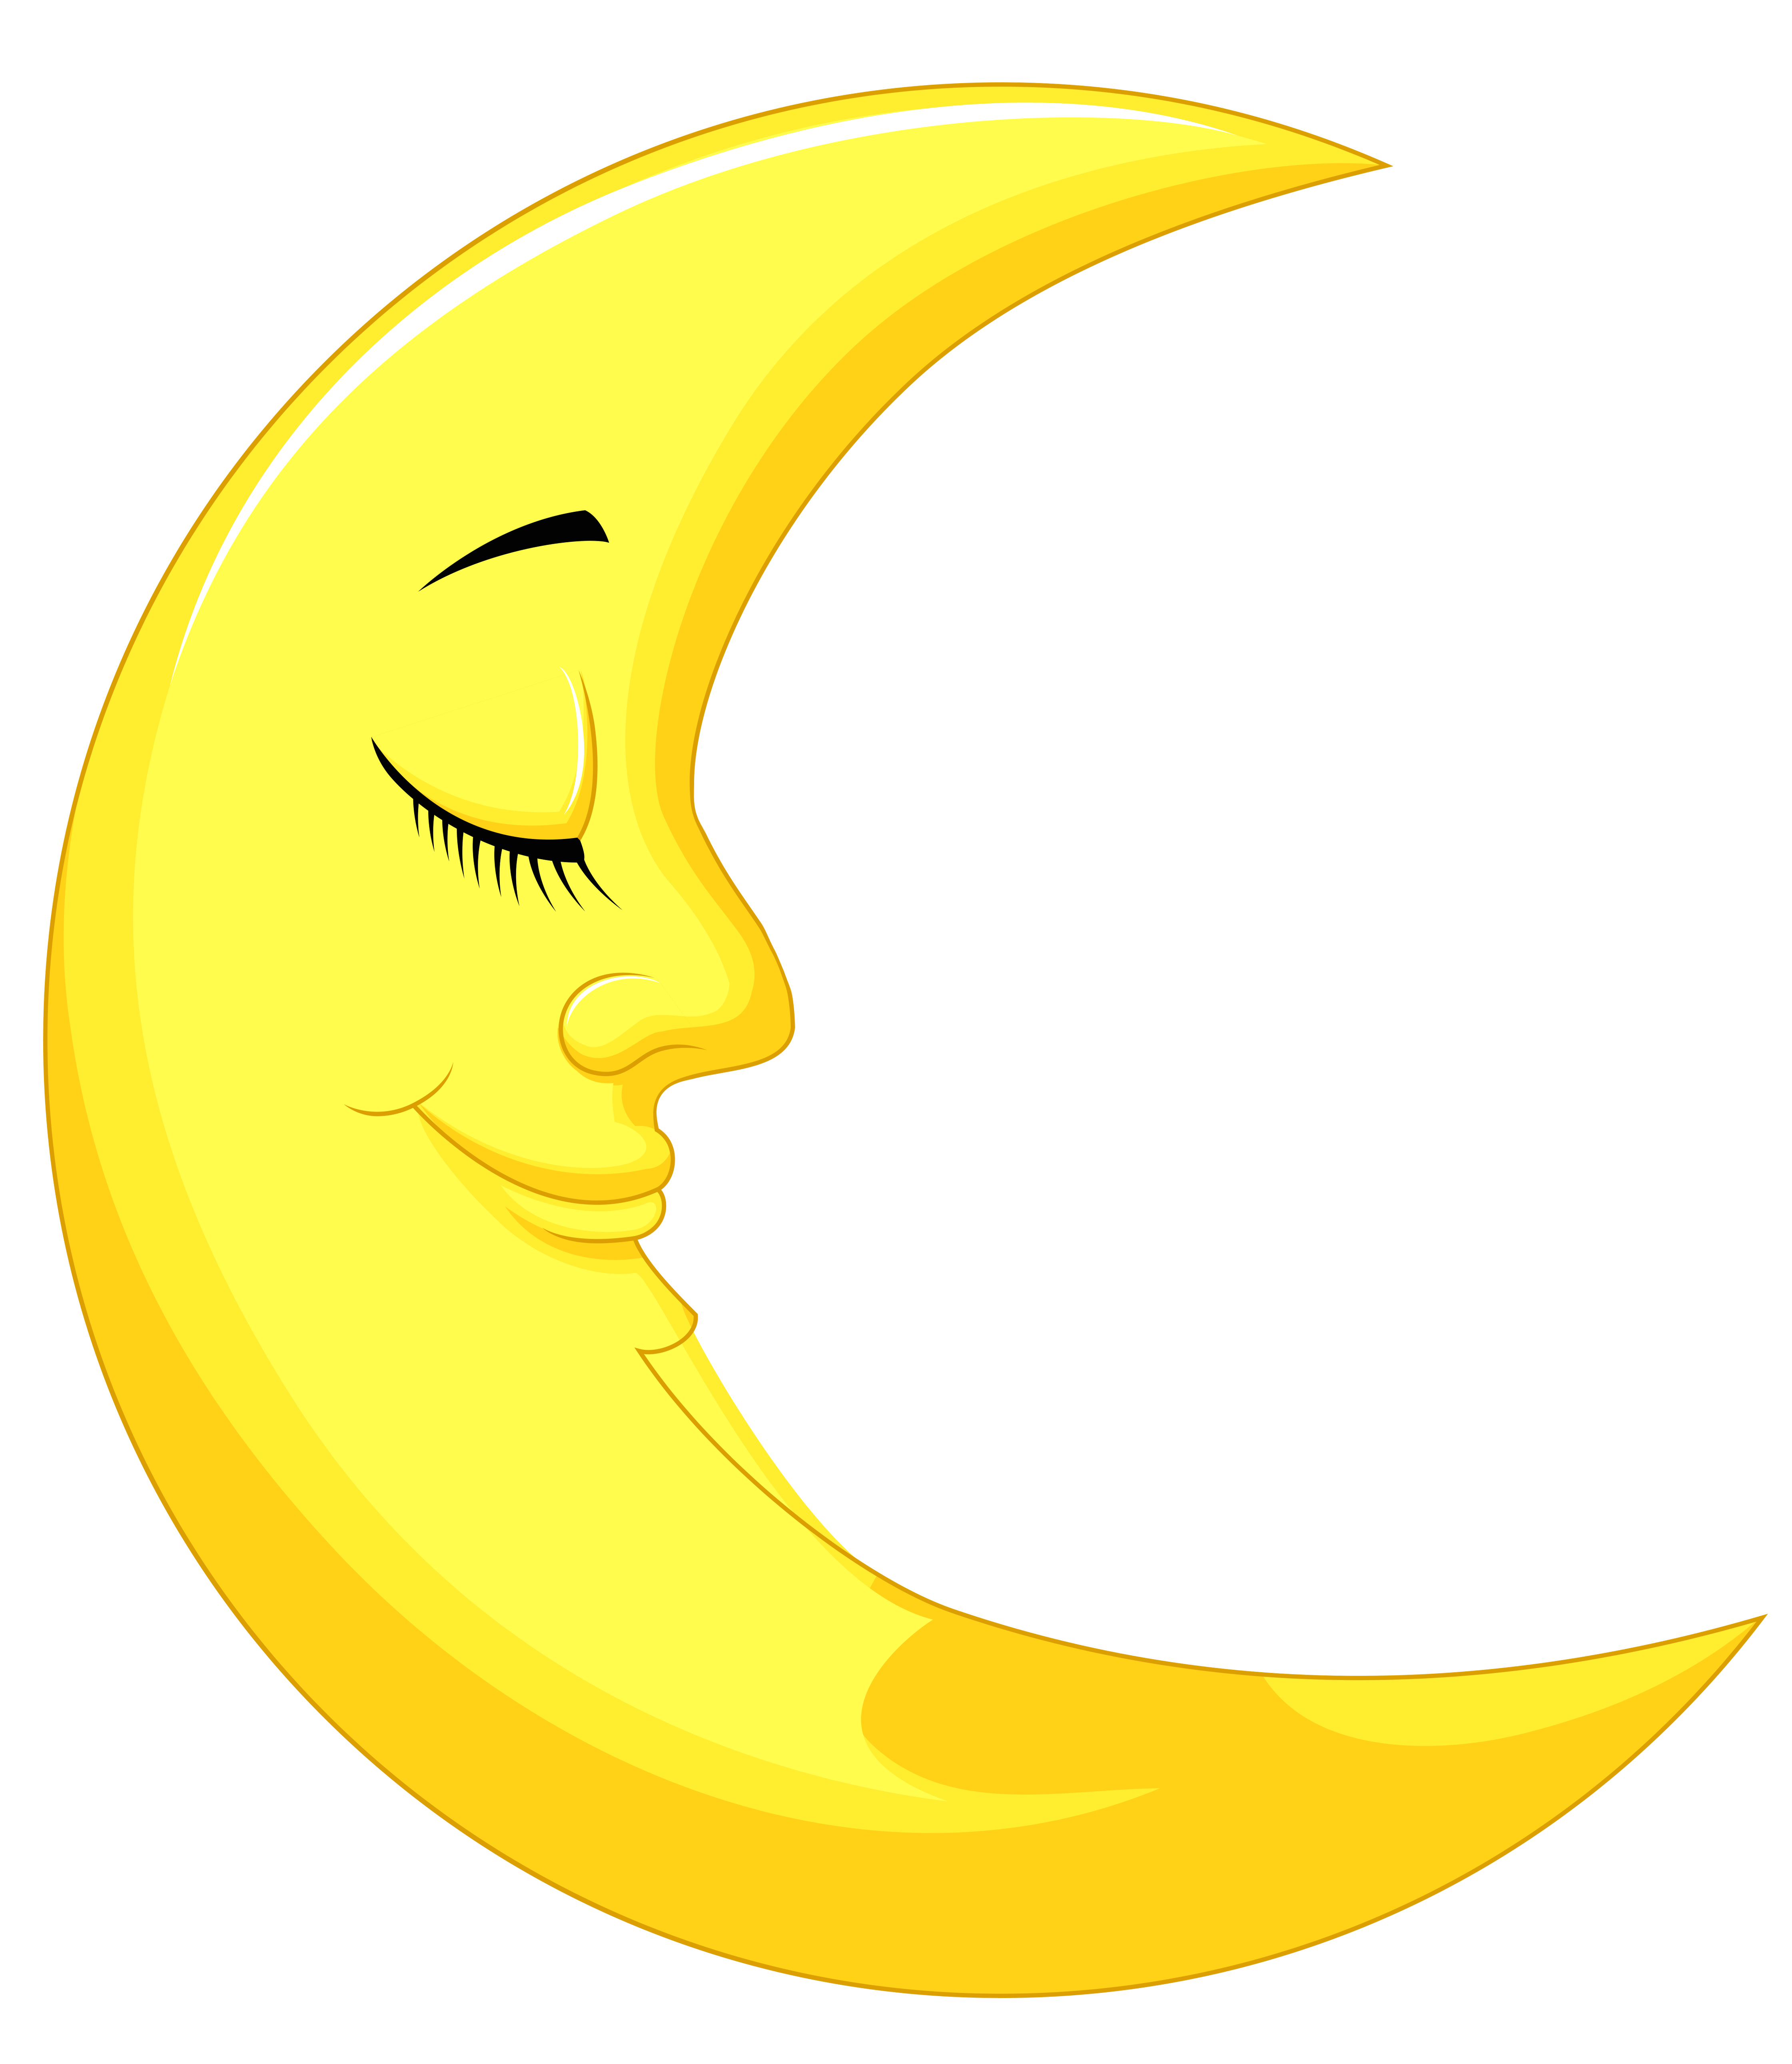 Moon clipart symbol. Cute yellow png picture